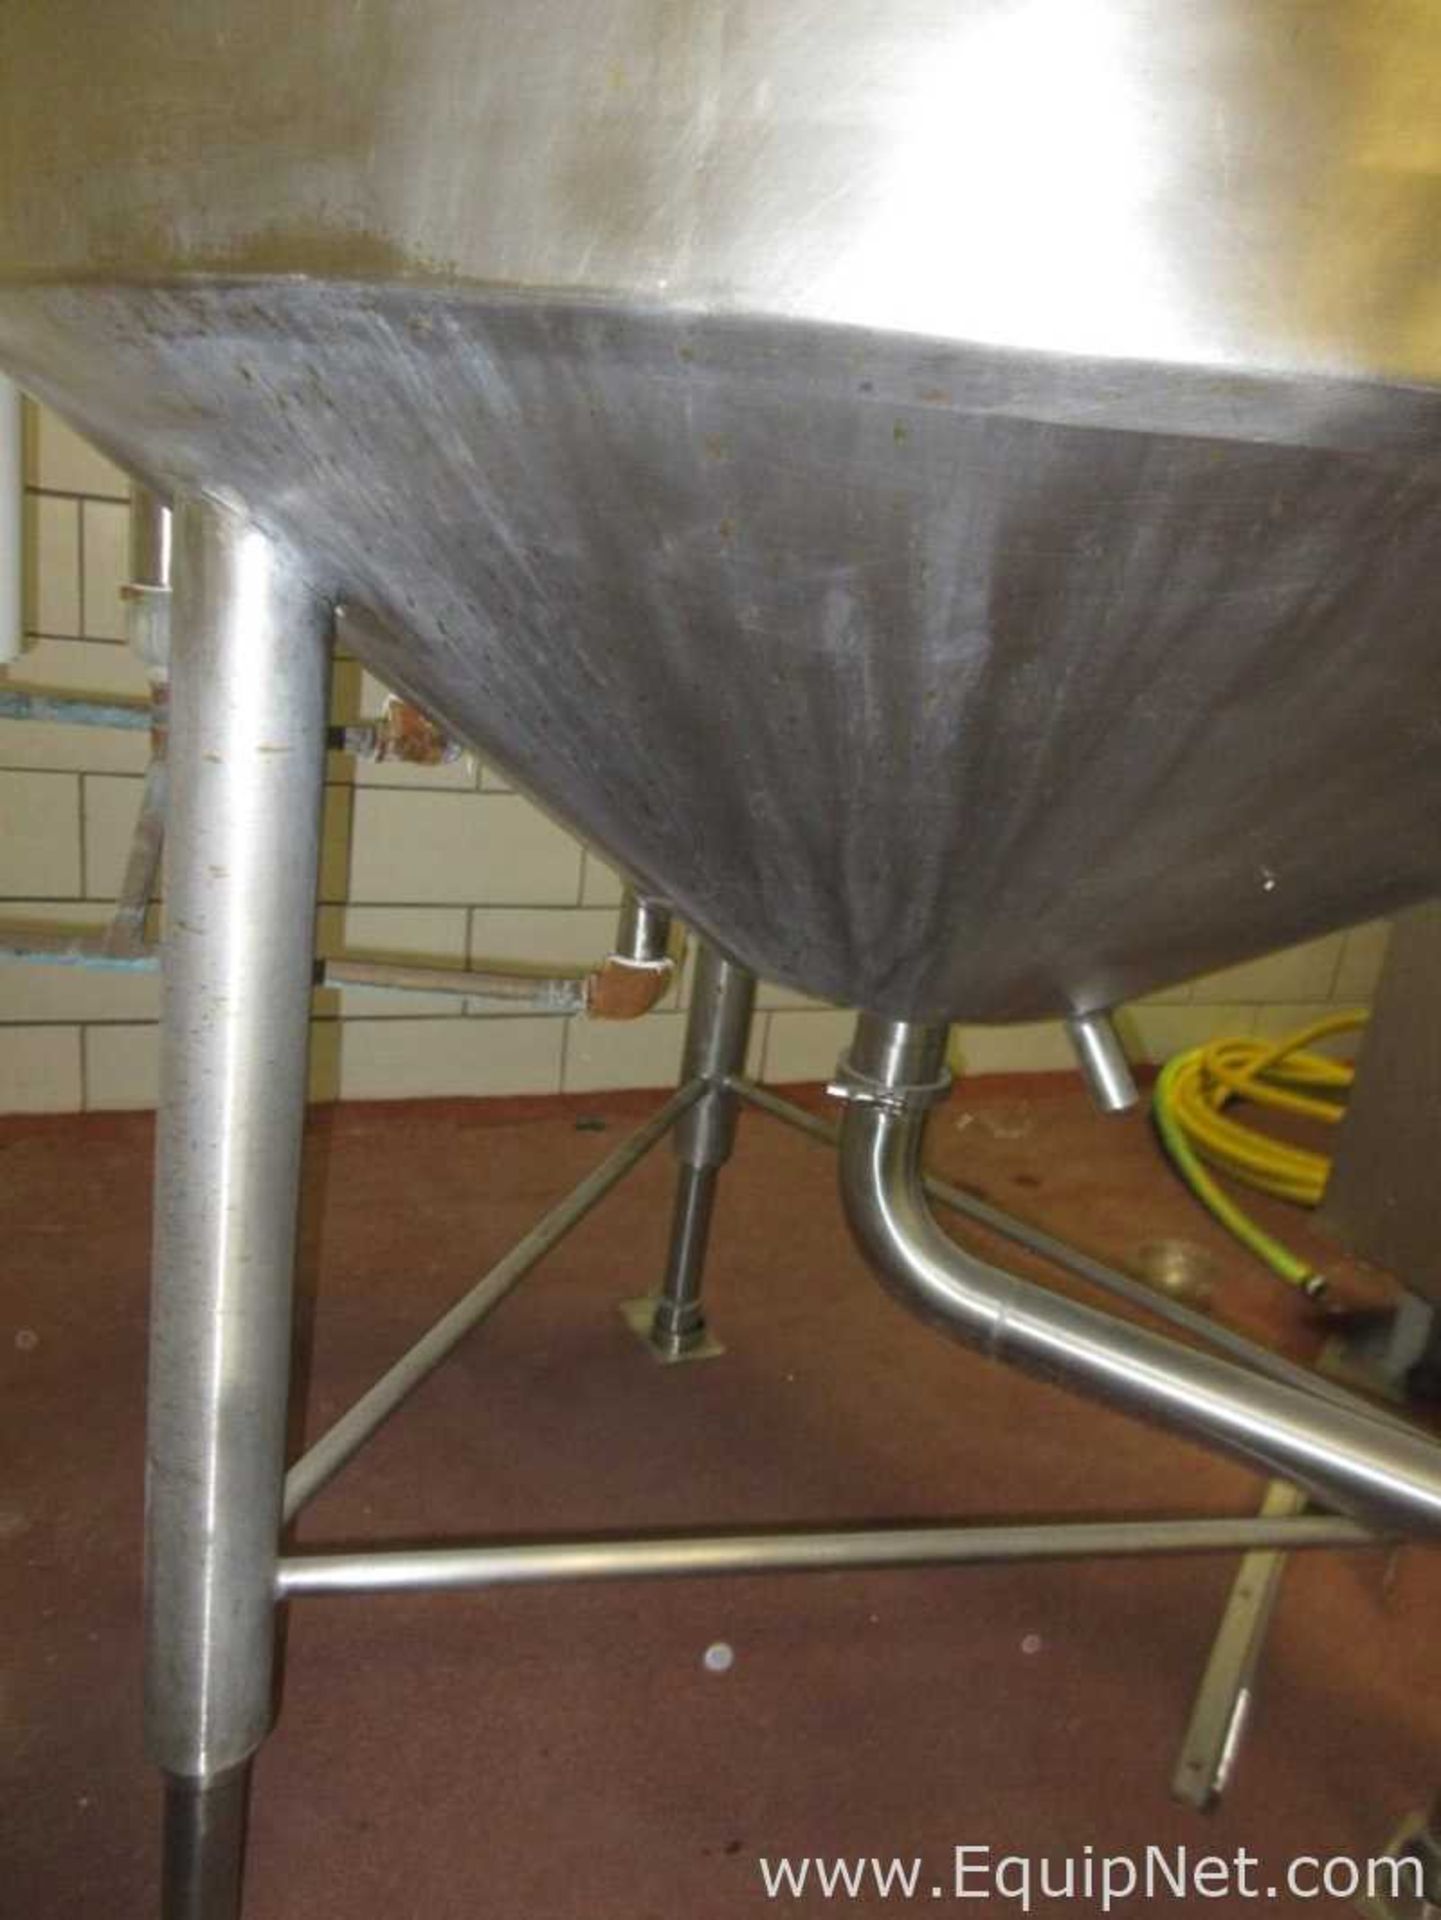 Stainless Steel APV Crepaco Mixer With Agitator - Image 8 of 11